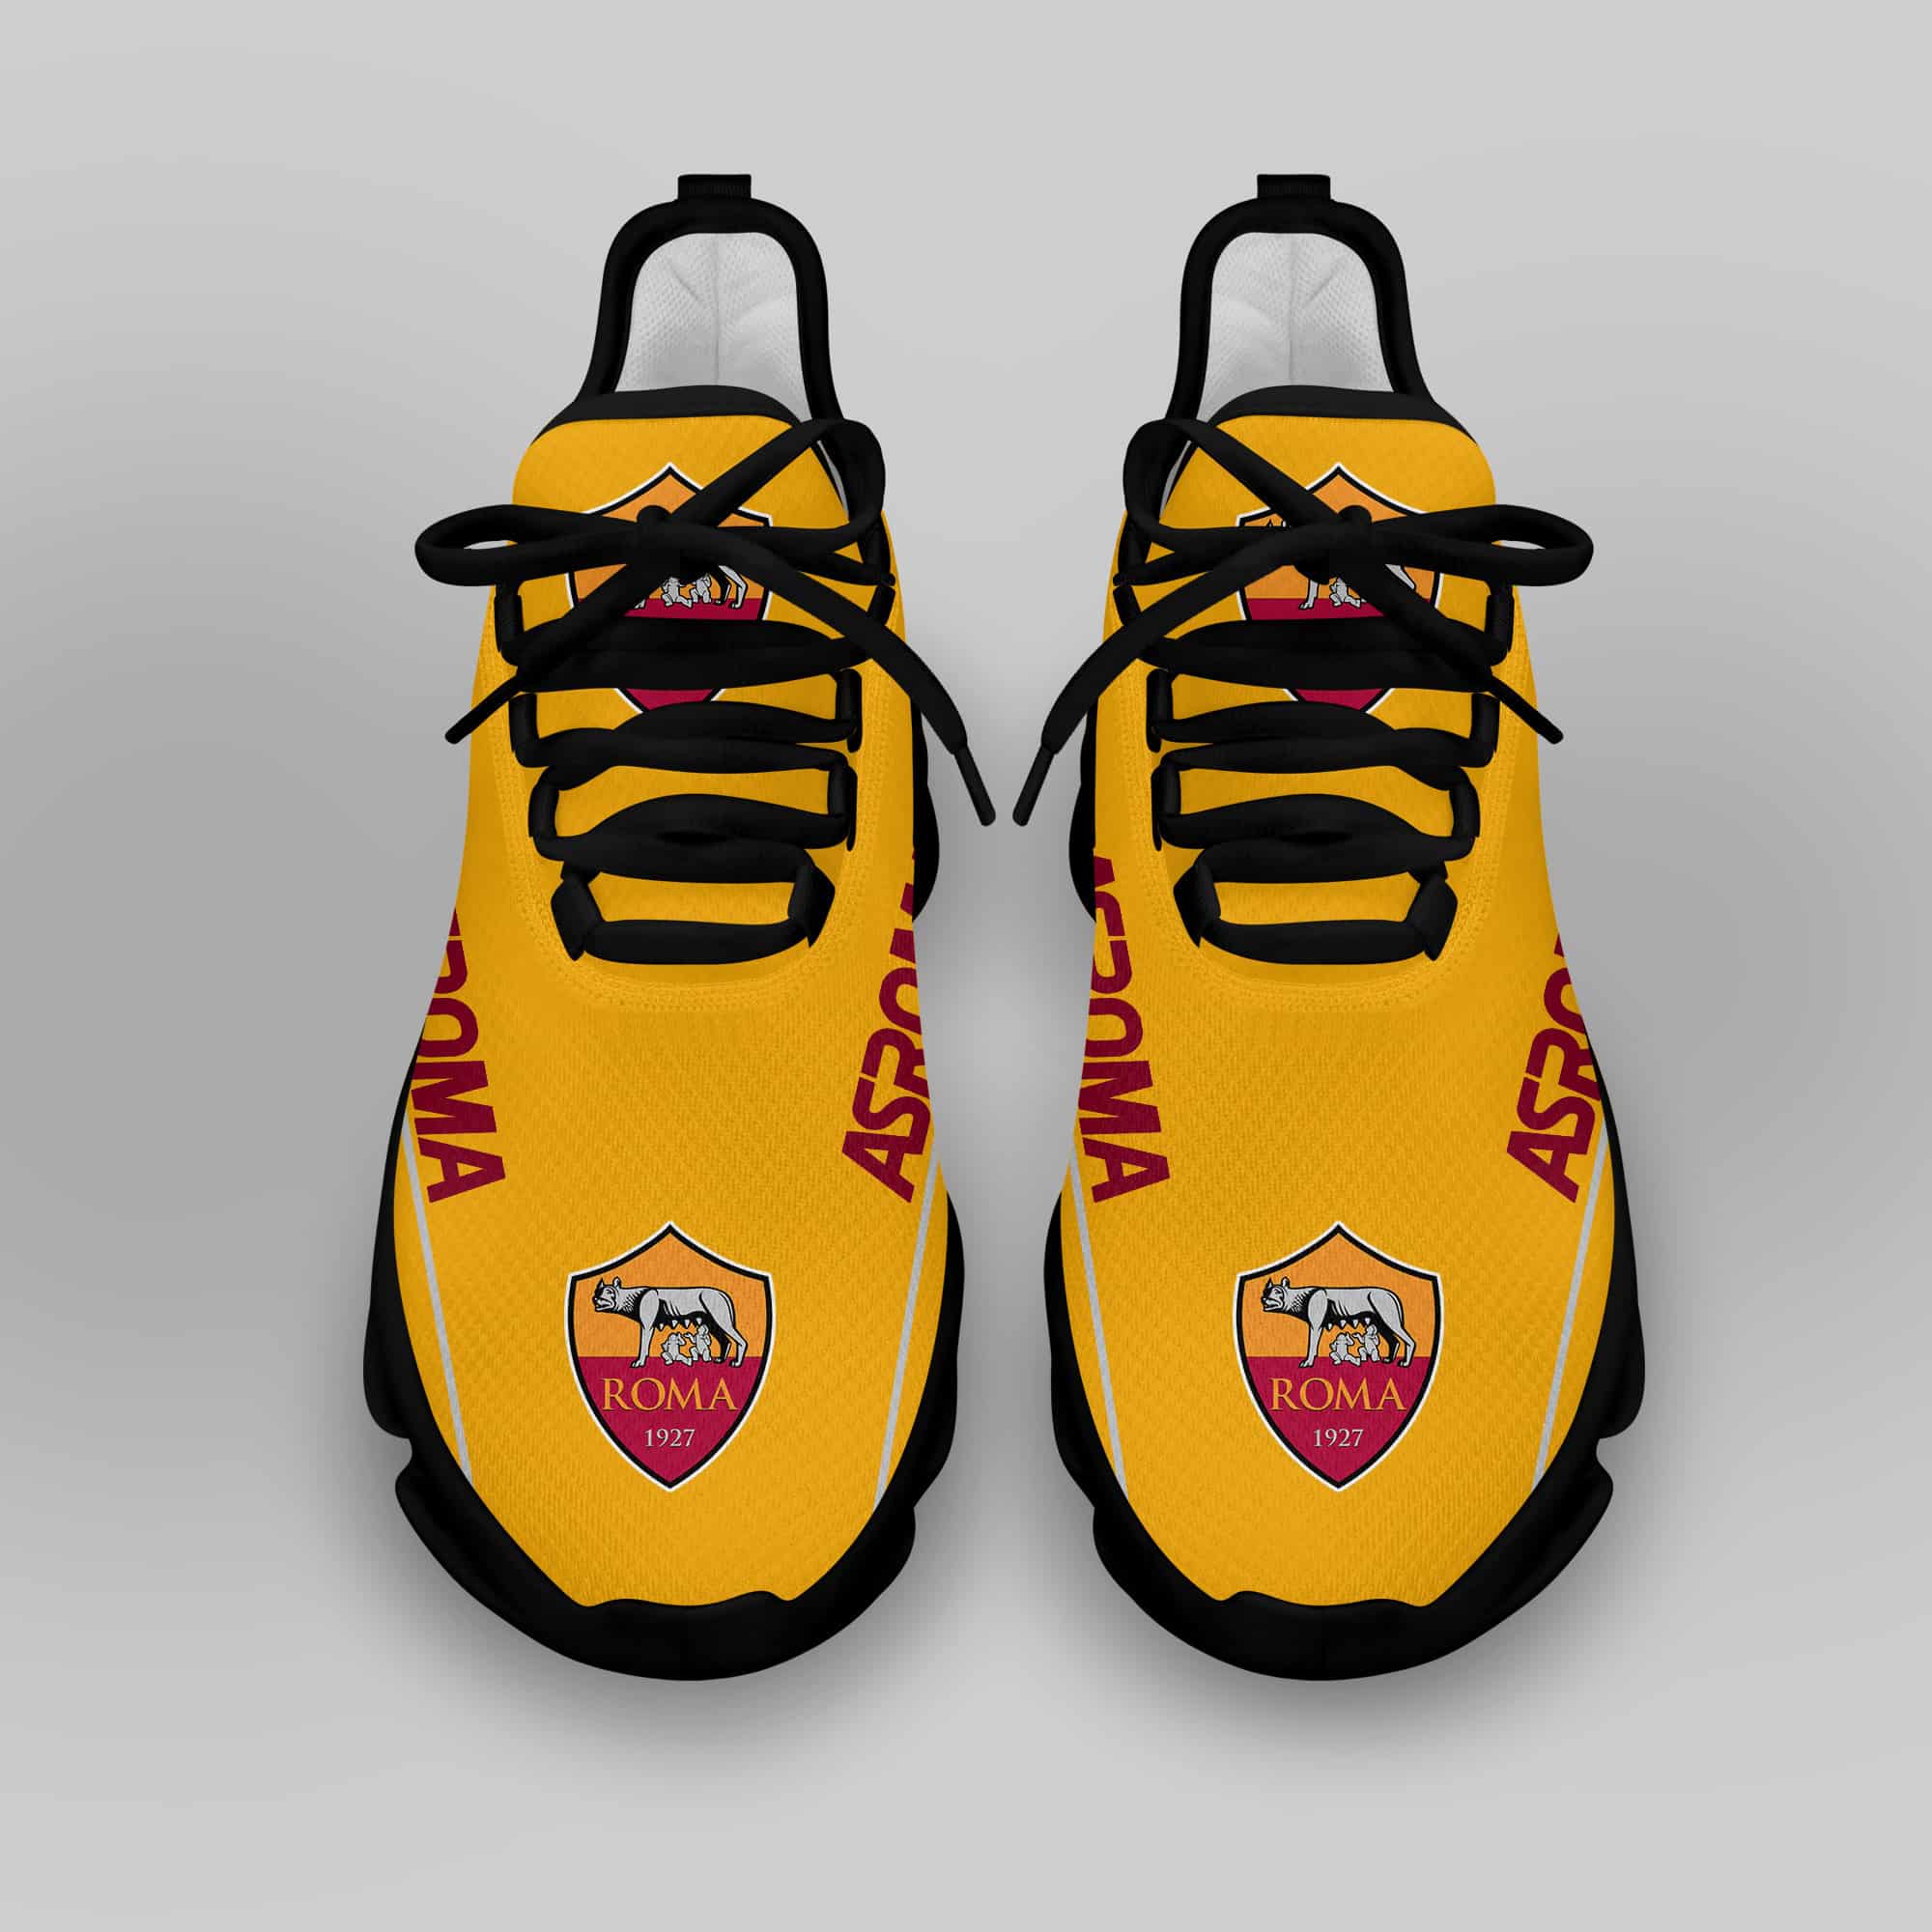 As Roma Running Shoes Max Soul Shoes Sneakers Ver 8 4